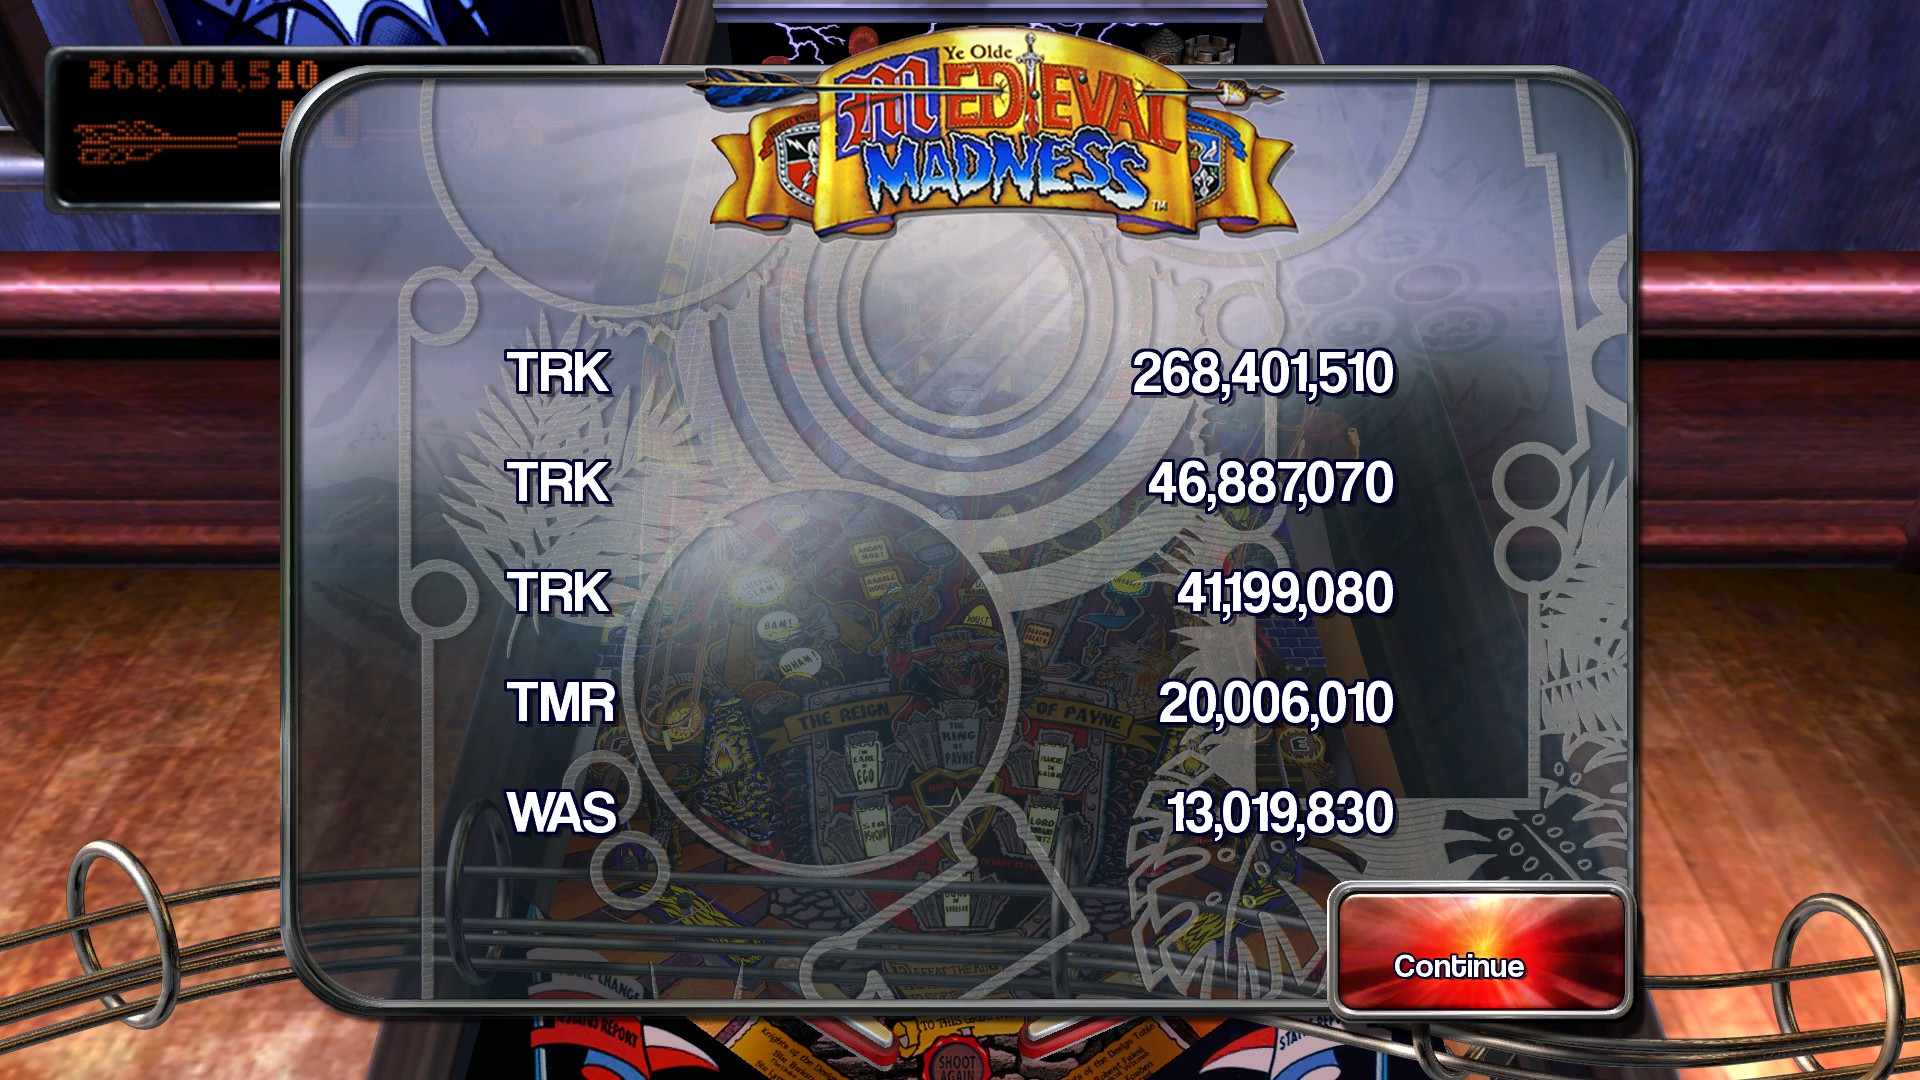 TheTrickster: Pinball Arcade: Medieval Madness (PC) 268,401,510 points on 2015-11-21 13:39:24